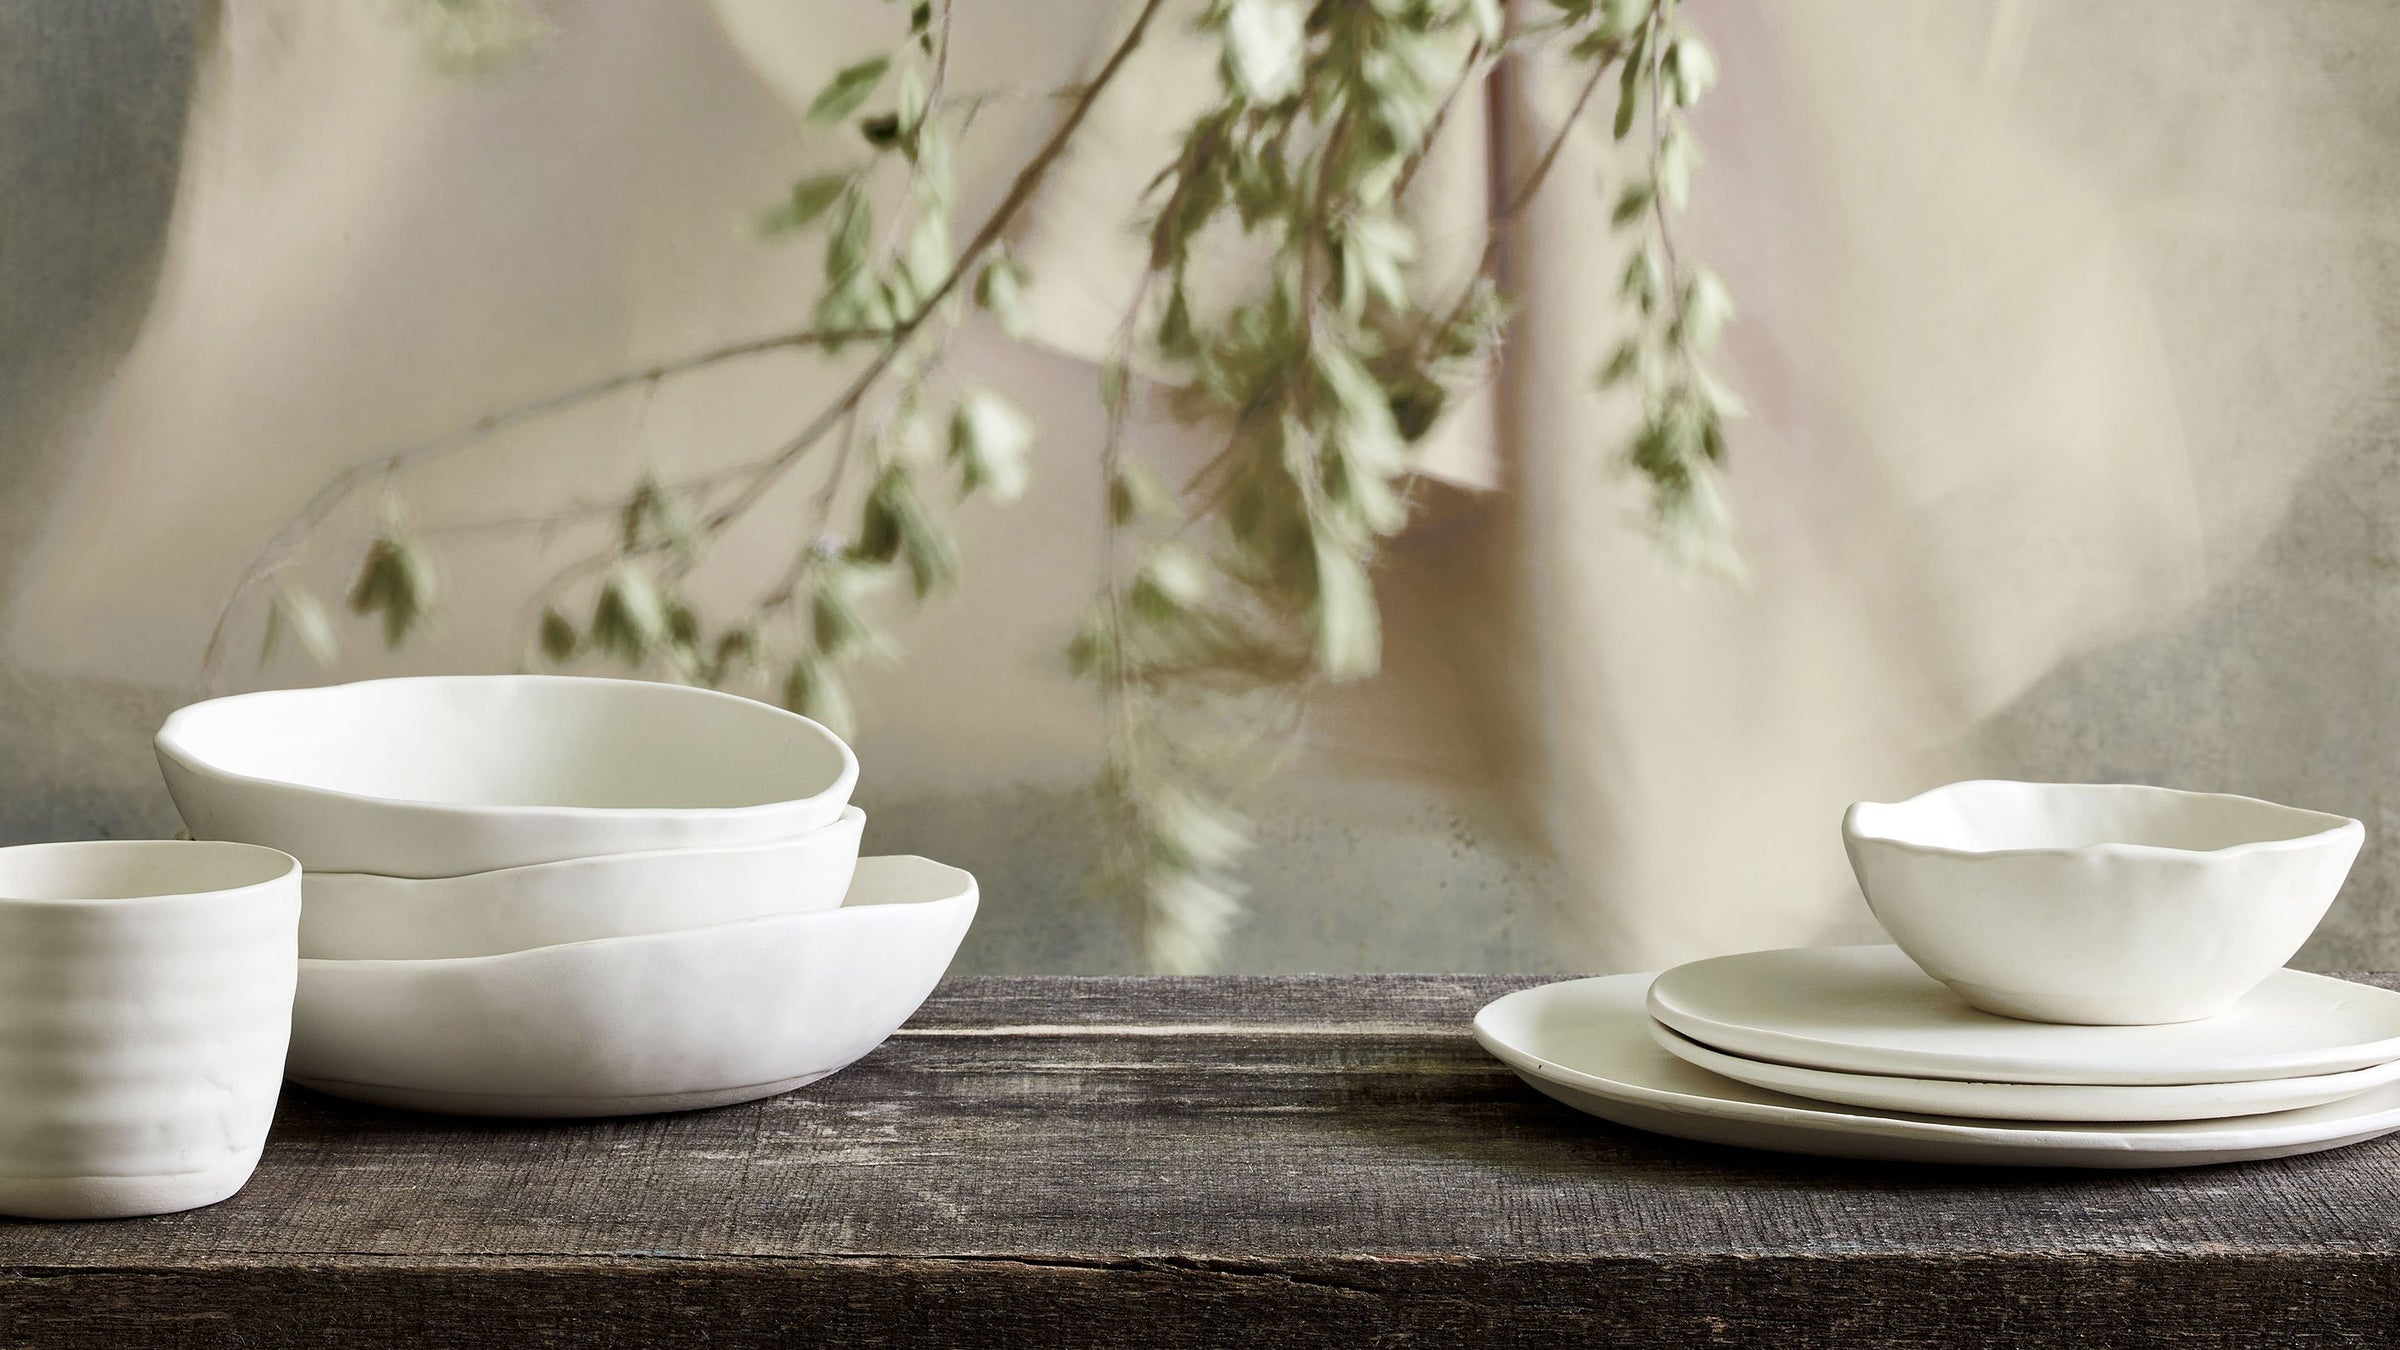 DBO HOME artisan ceramic bare plates, bowls, and tumbler cup on natural wooden table with soft plant background